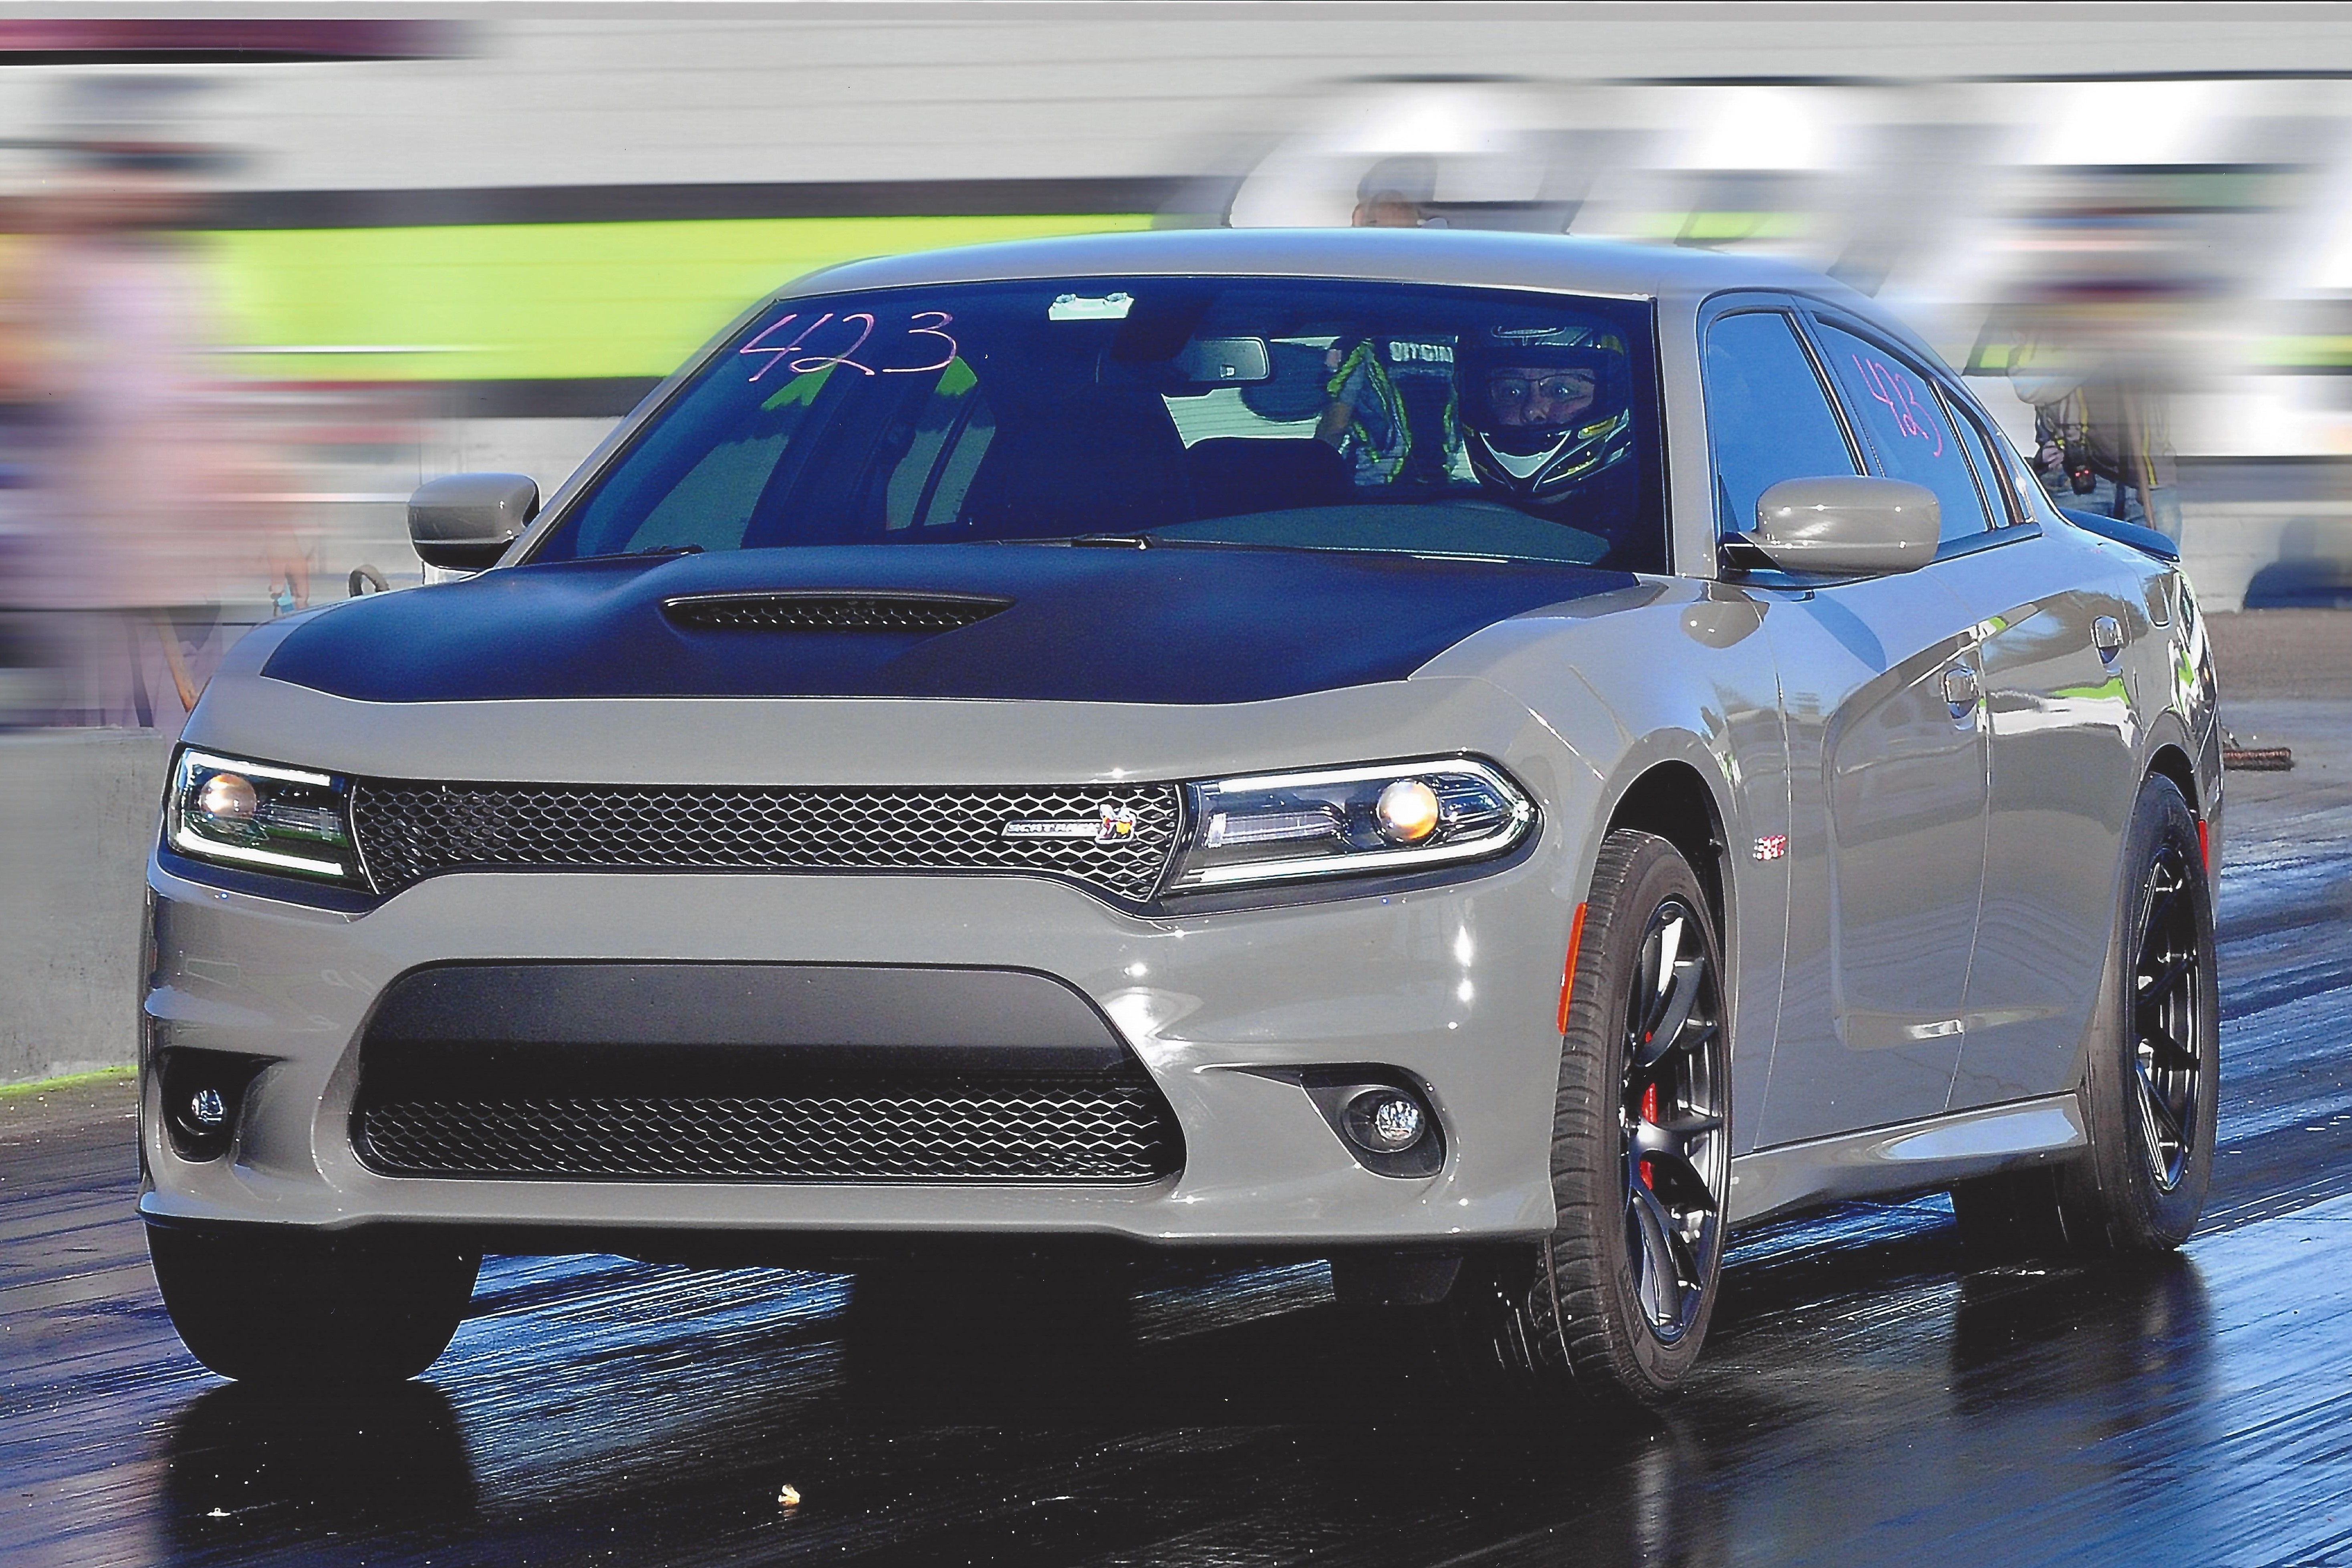 2018 Charger R/T Scat Pack